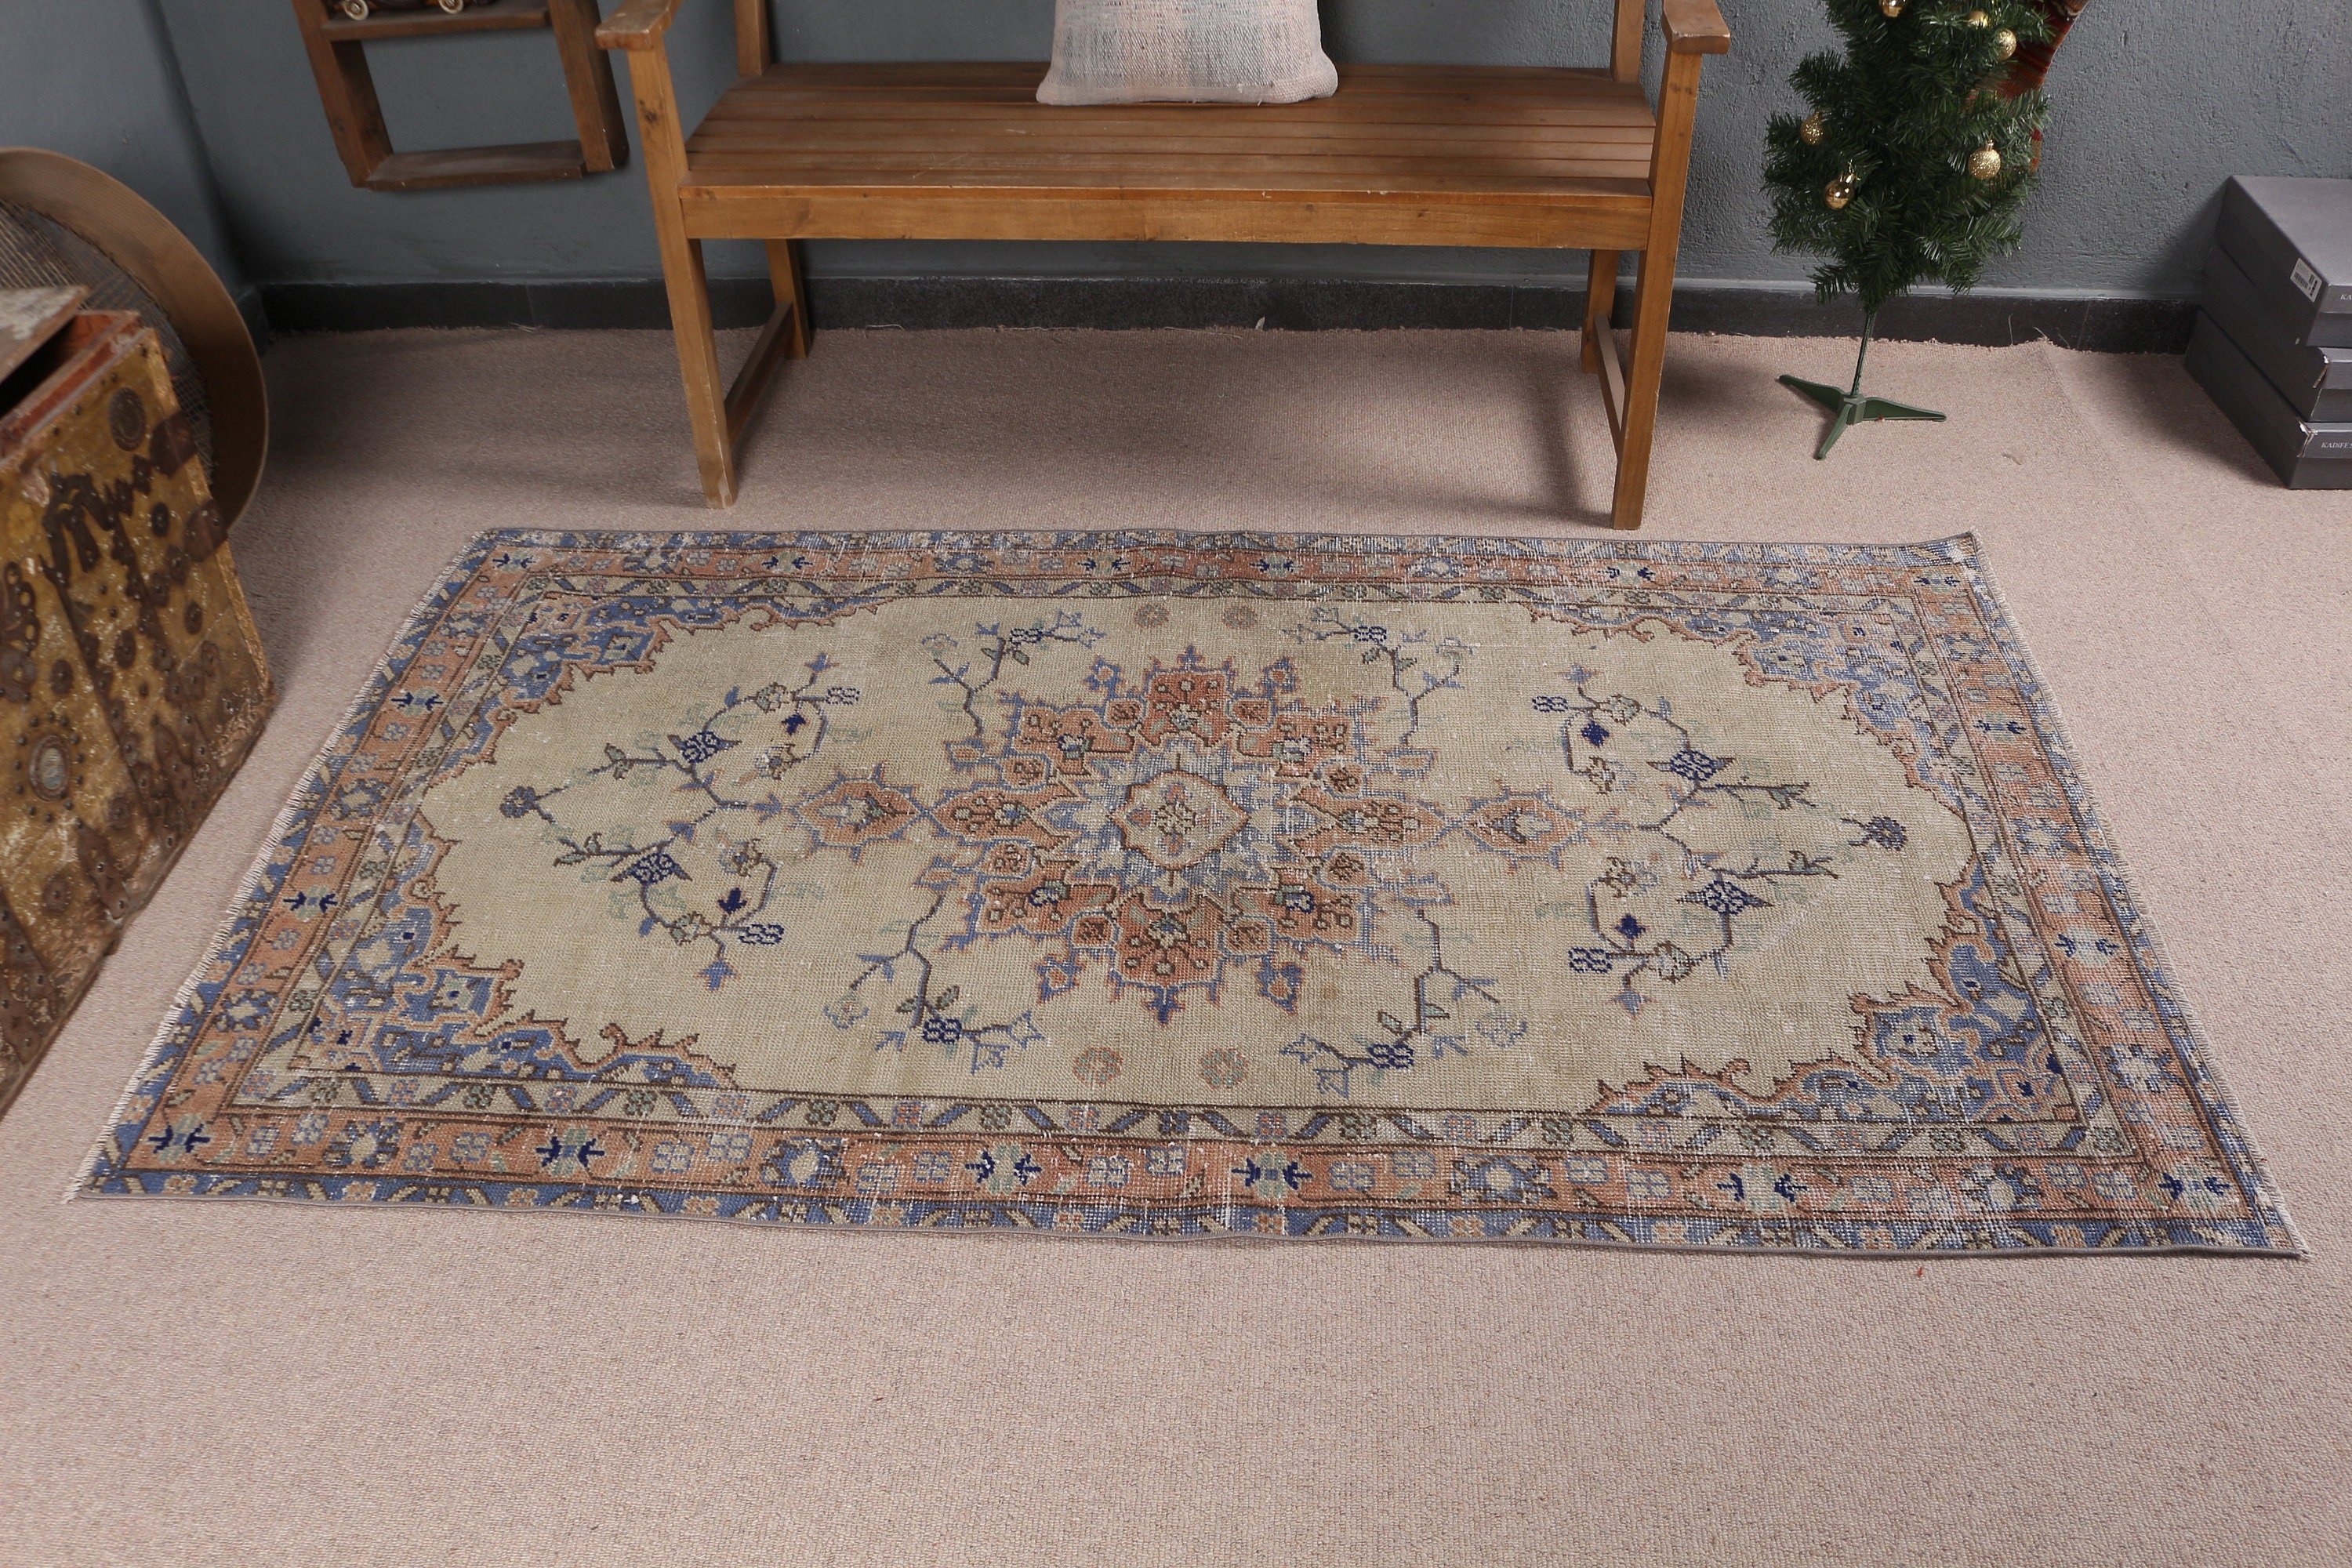 Beige  3.7x6.4 ft Accent Rug, Cool Rug, Entry Rug, Vintage Rug, Floor Rugs, Kitchen Rugs, Rugs for Entry, Turkish Rug